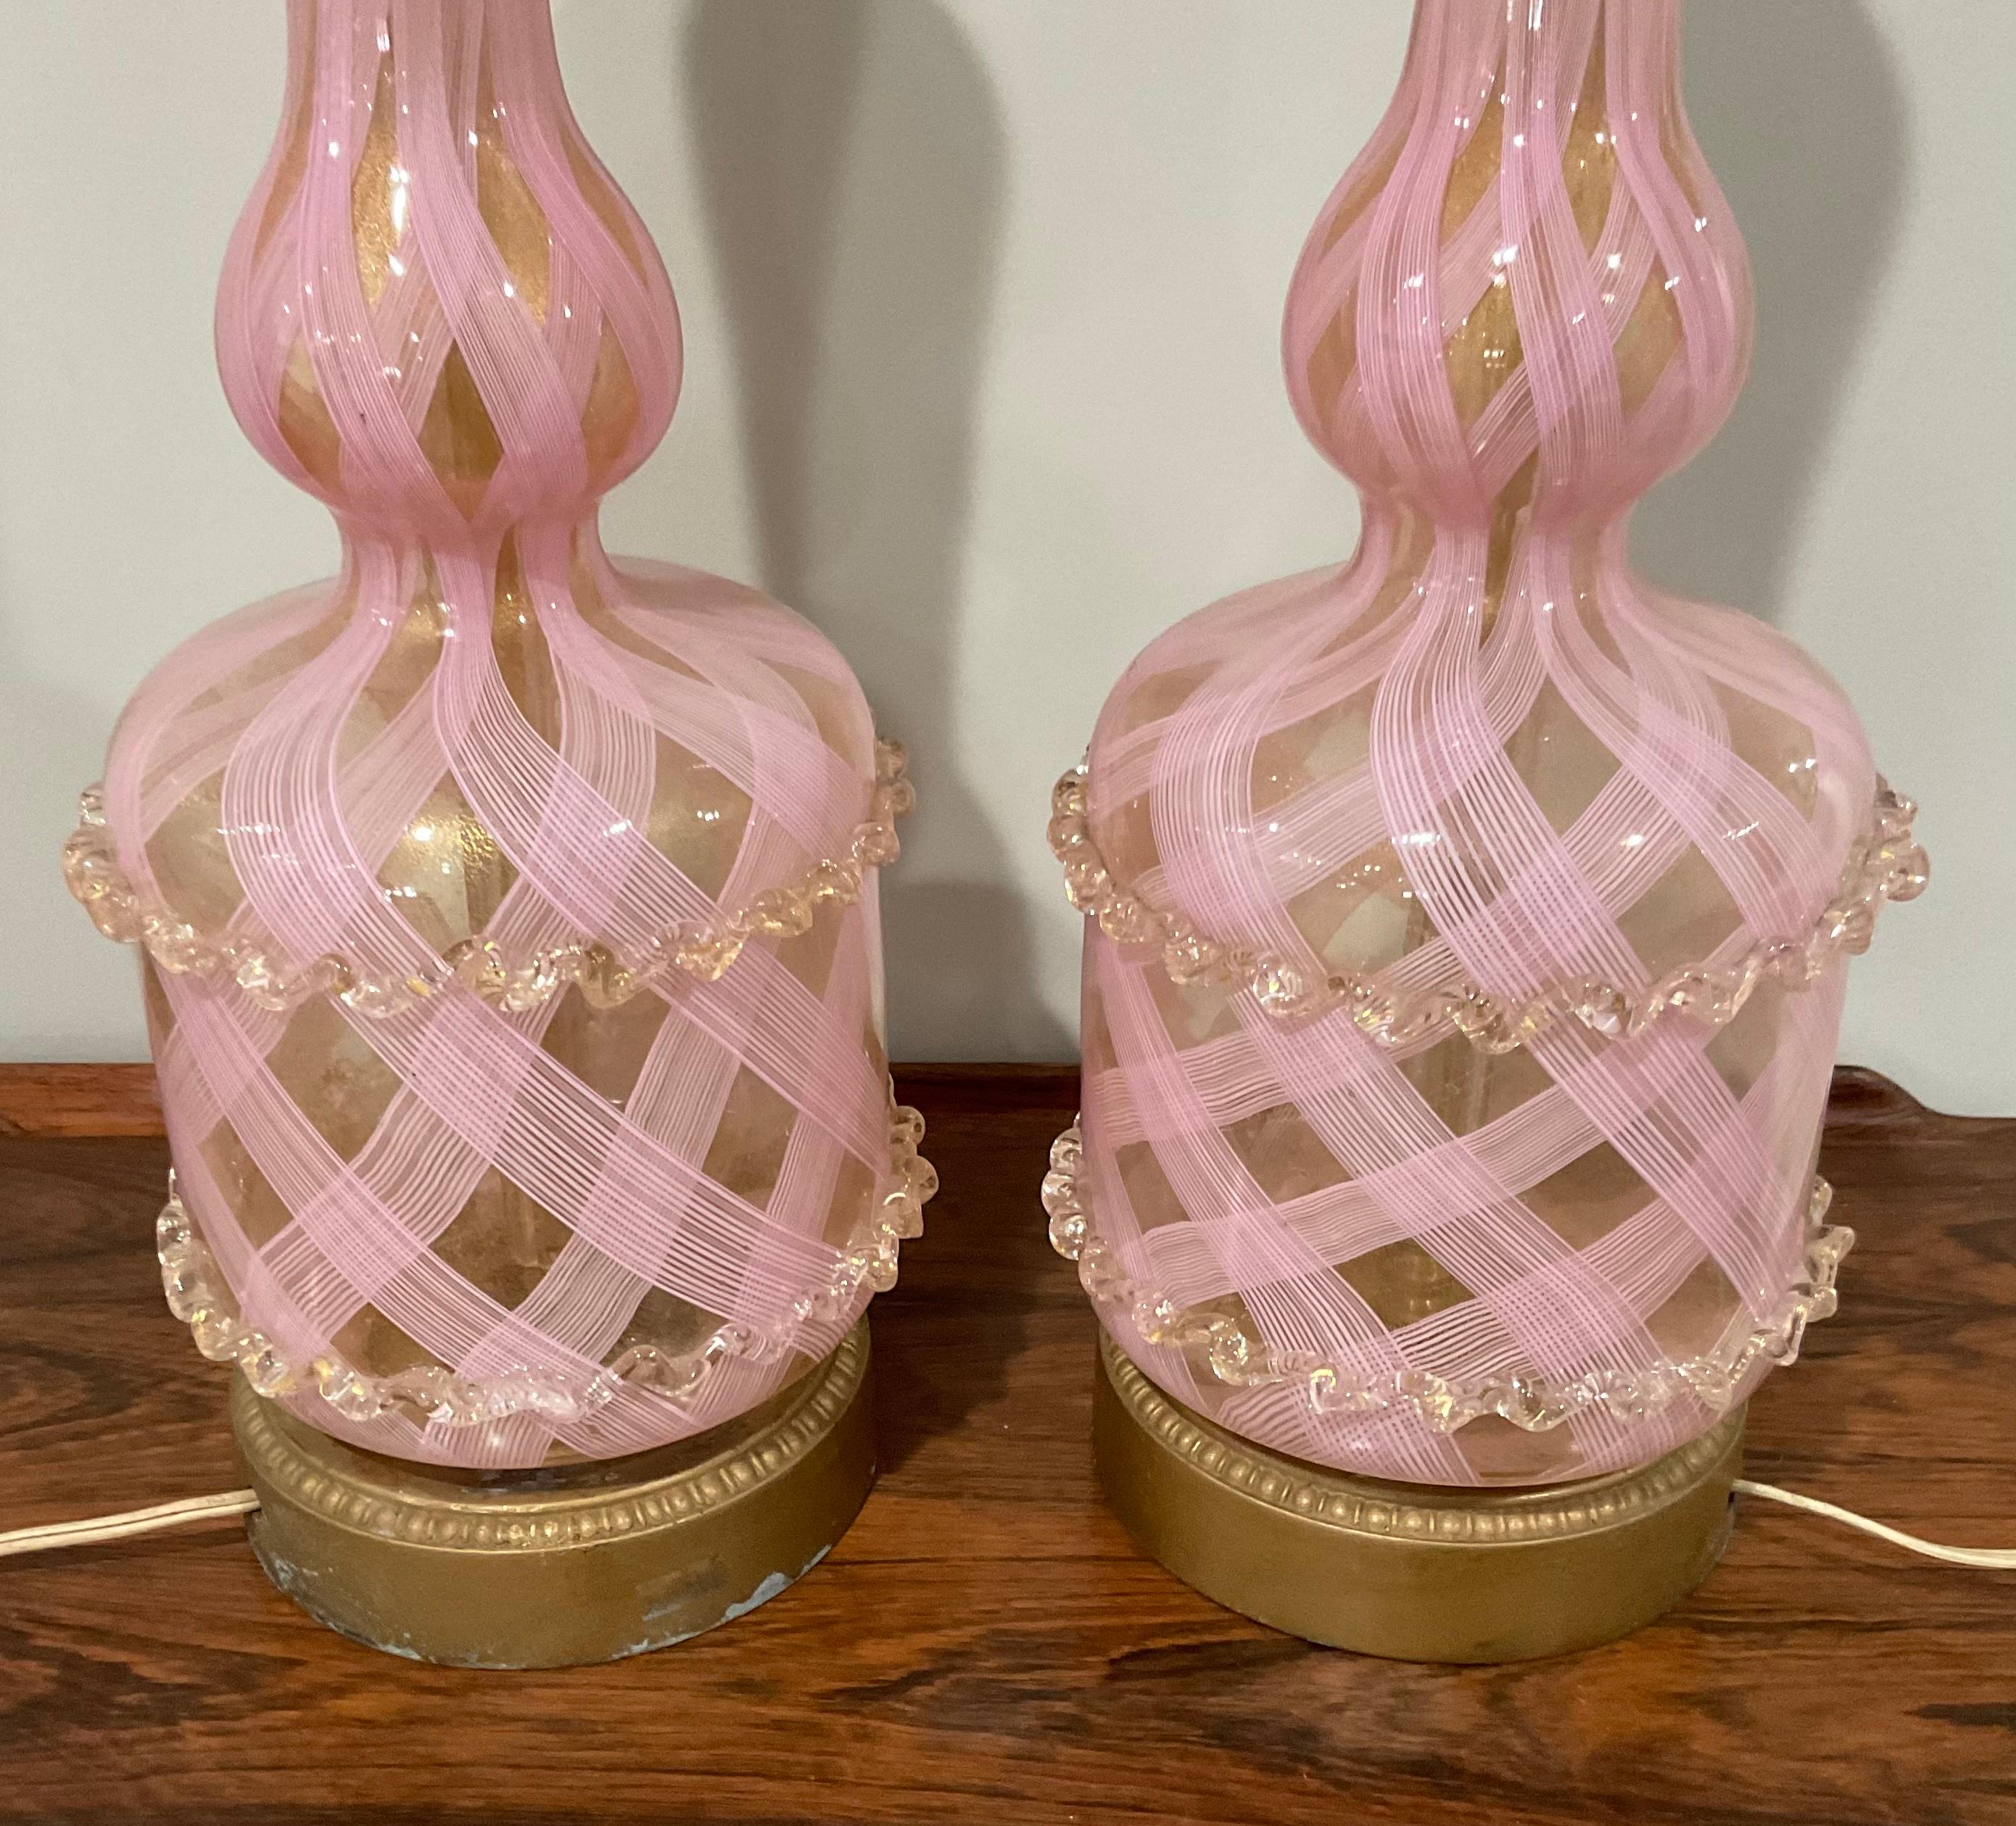 Rare Pair Barovier and Toso Murano Pair Lamps in Pink and Gold Ercole Barovier In Good Condition For Sale In Ann Arbor, MI